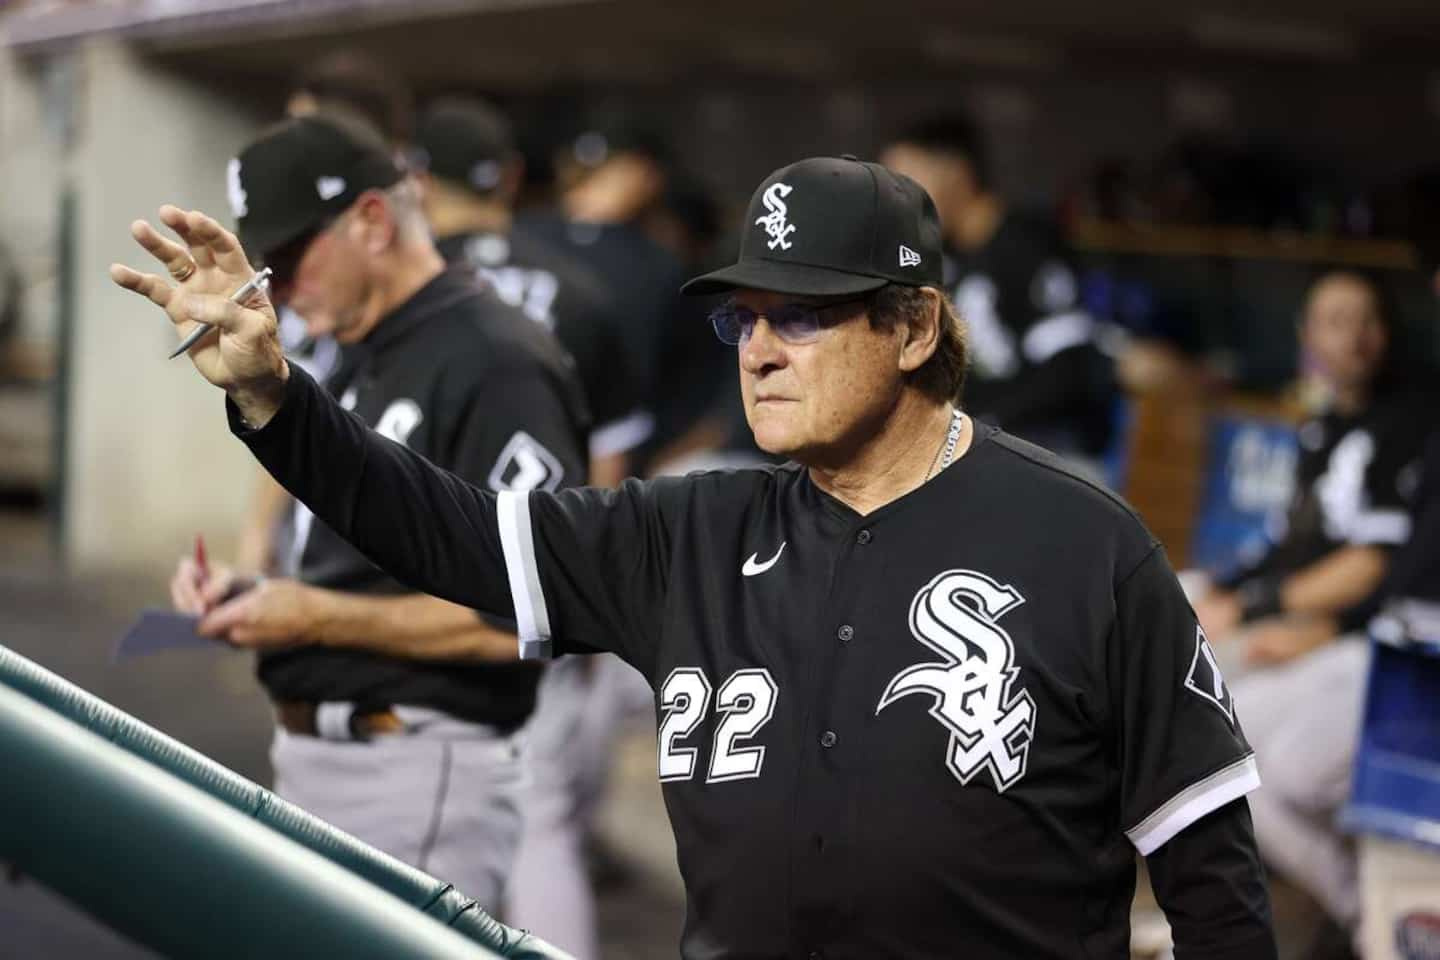 More bickering at the White Sox